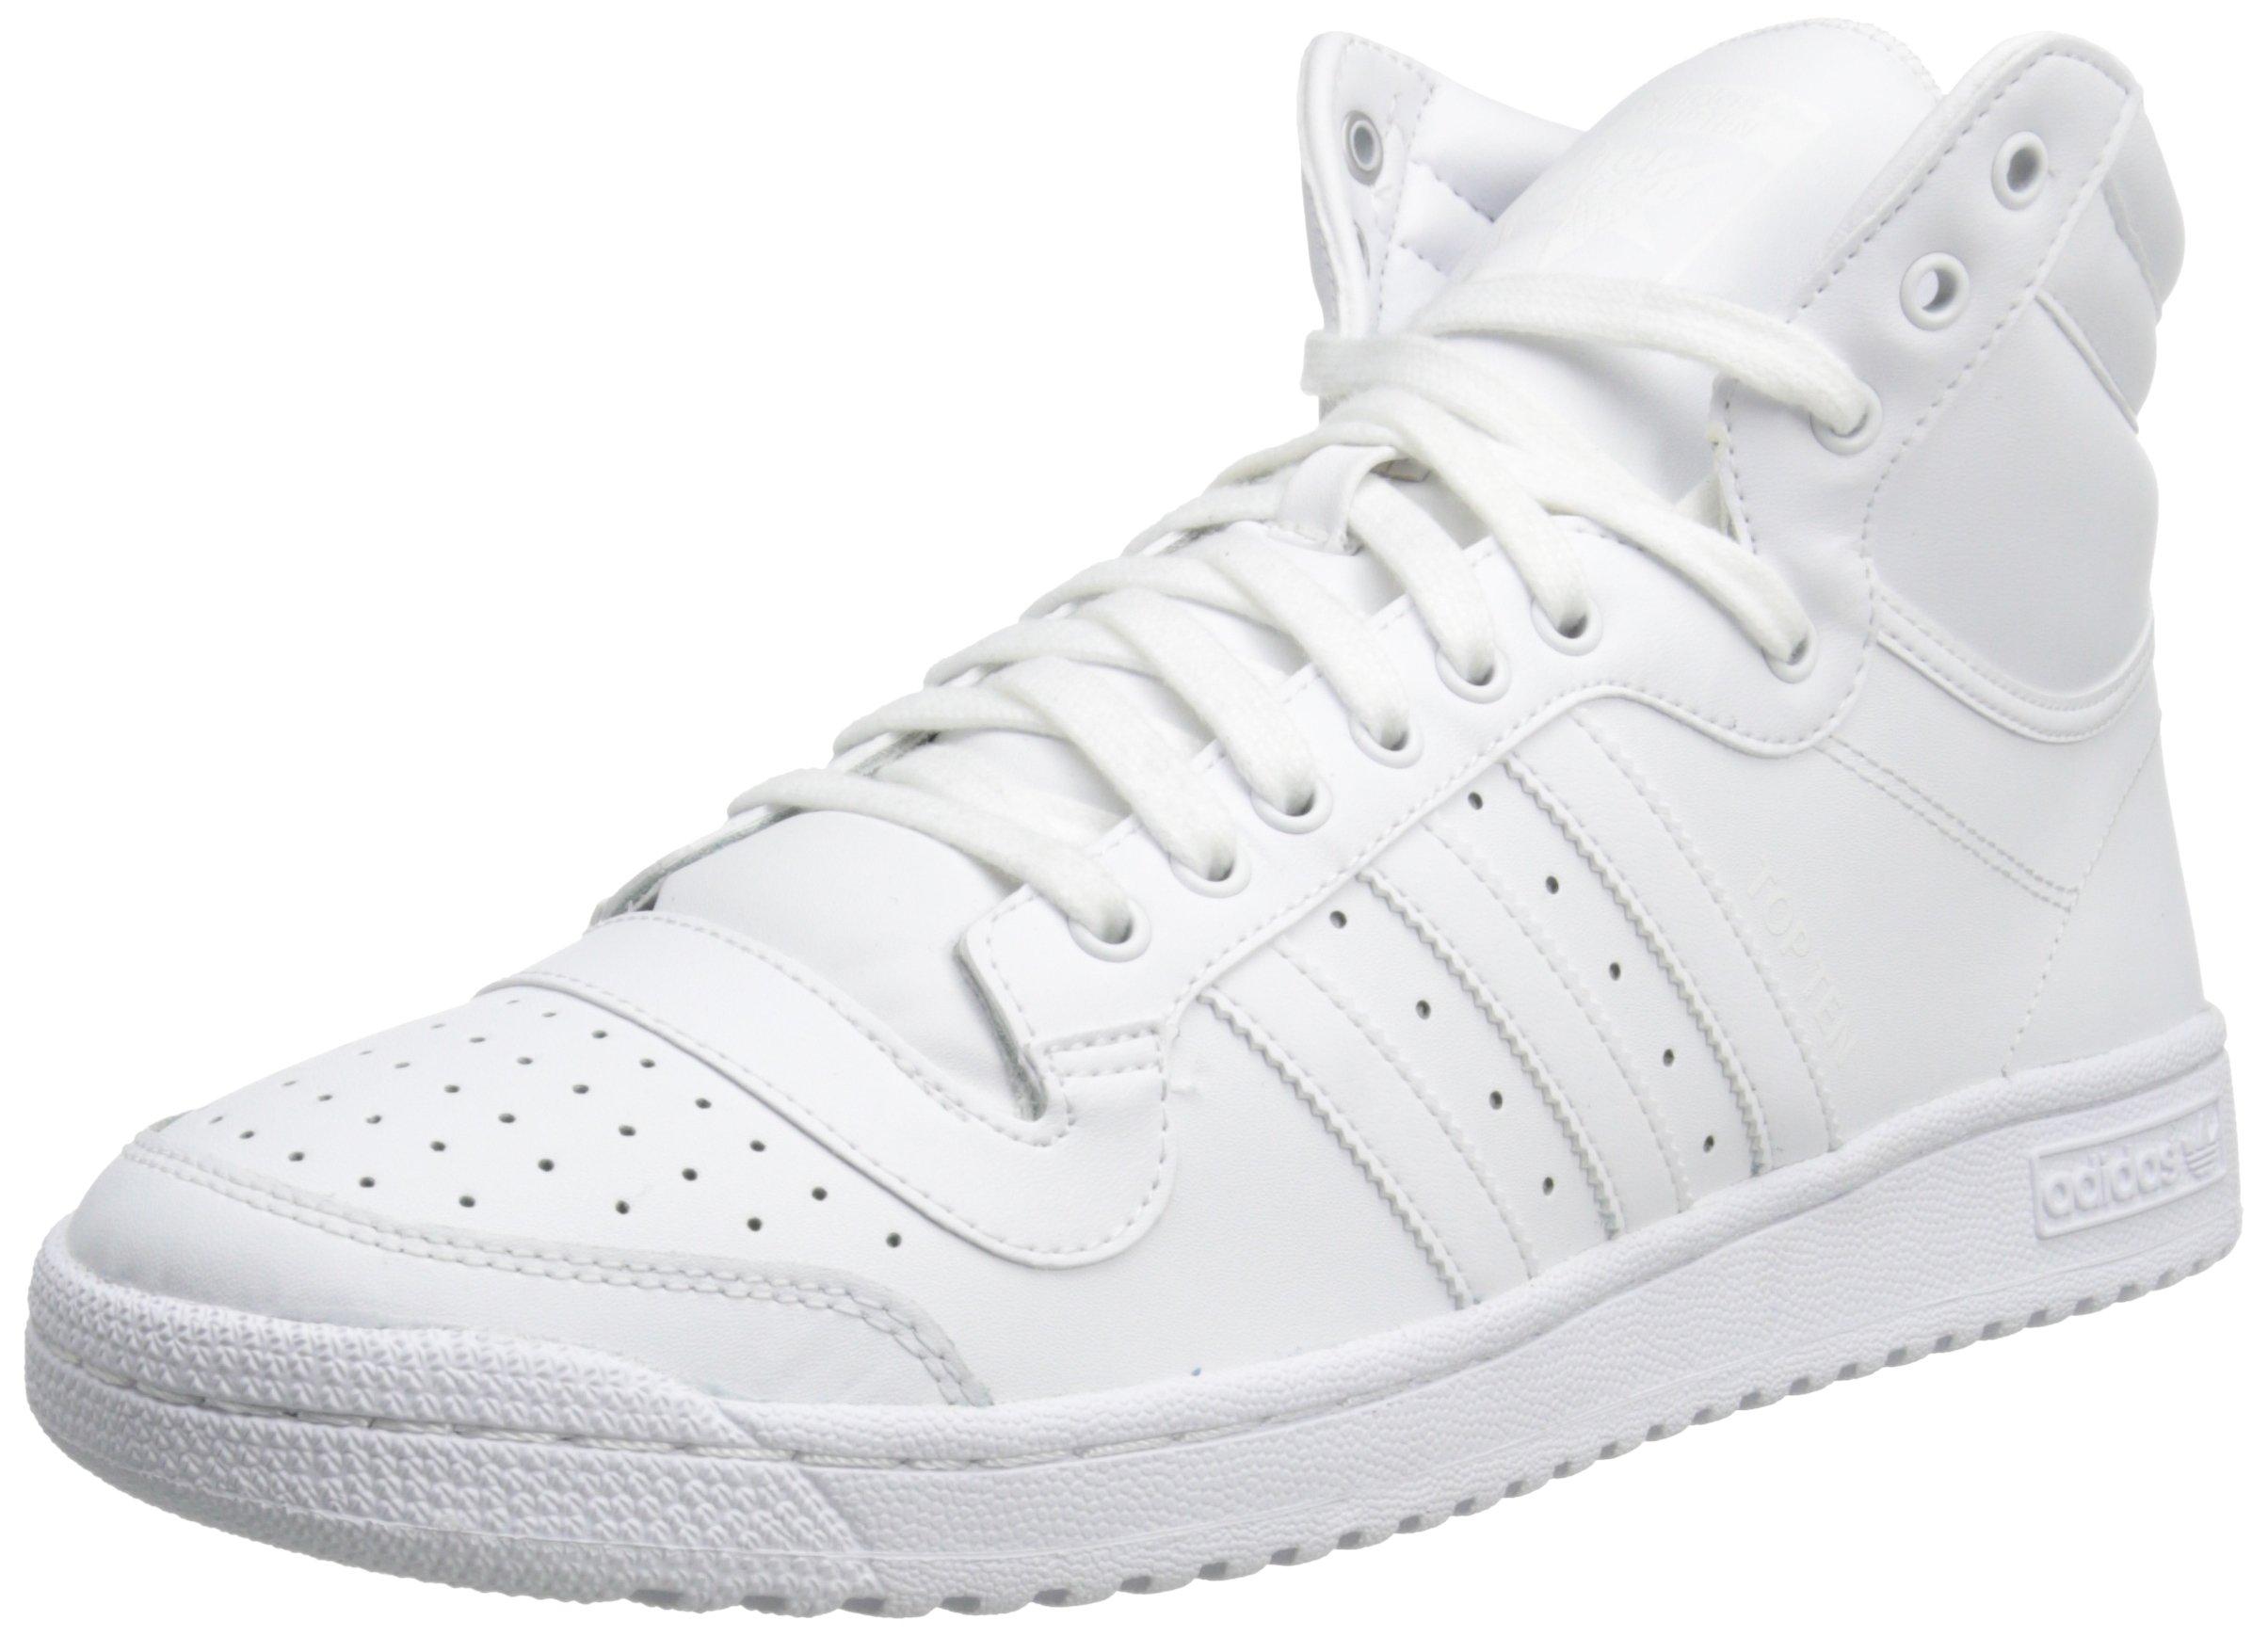 adidas Originals Leather Top Ten Hi Basketball Shoes in White/White/White  (White) for Men - Save 50% - Lyst